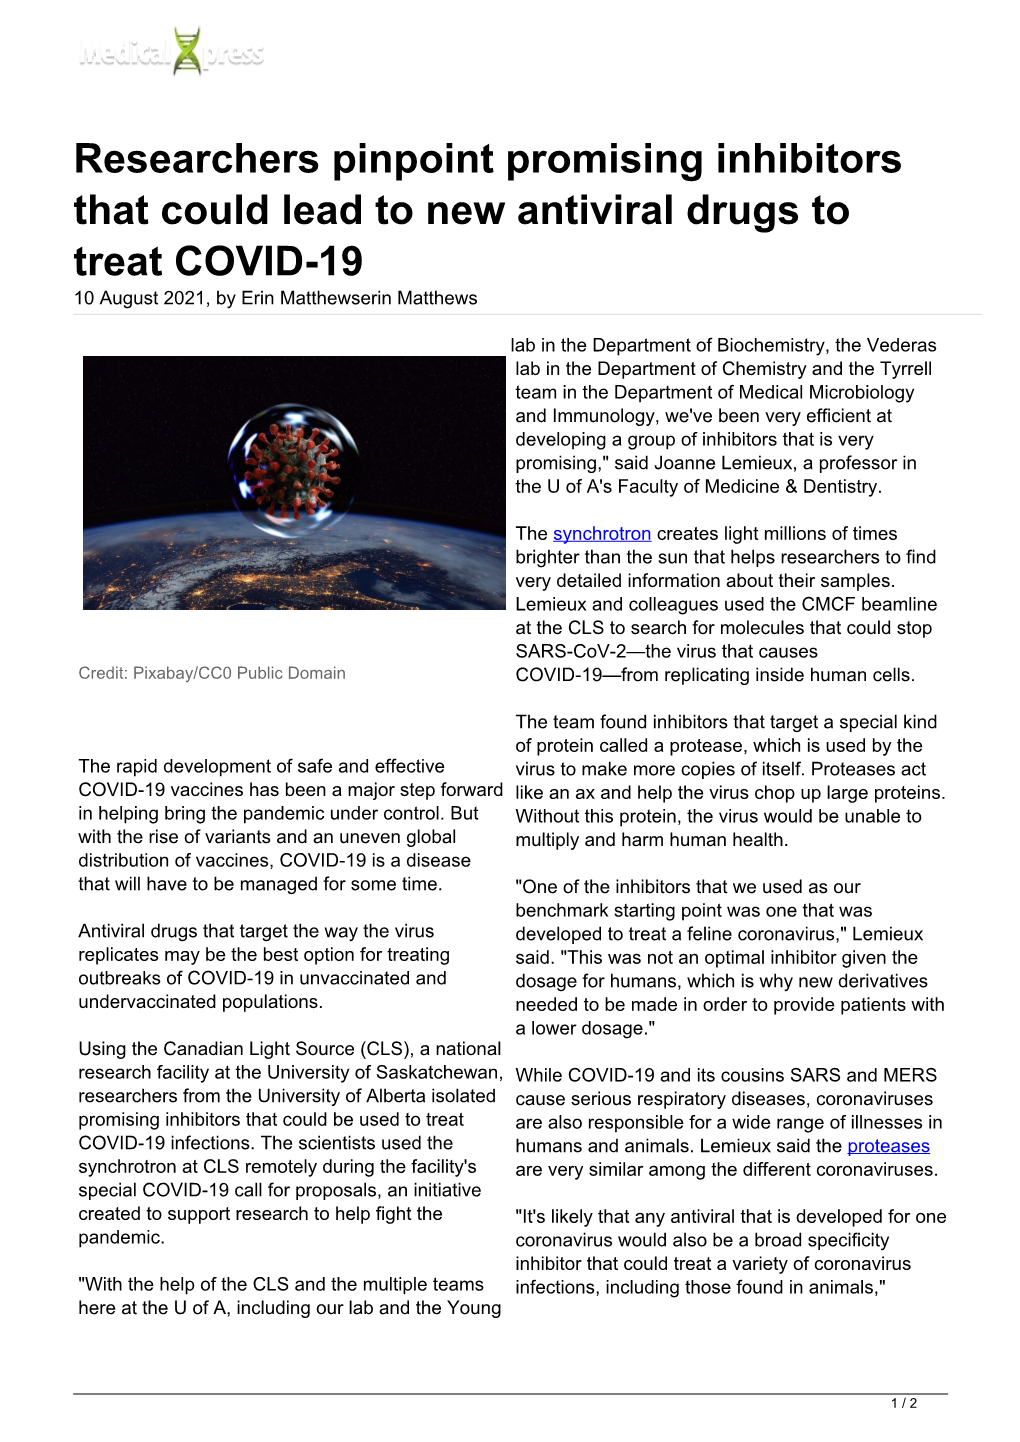 Researchers Pinpoint Promising Inhibitors That Could Lead to New Antiviral Drugs to Treat COVID-19 10 August 2021, by Erin Matthewserin Matthews